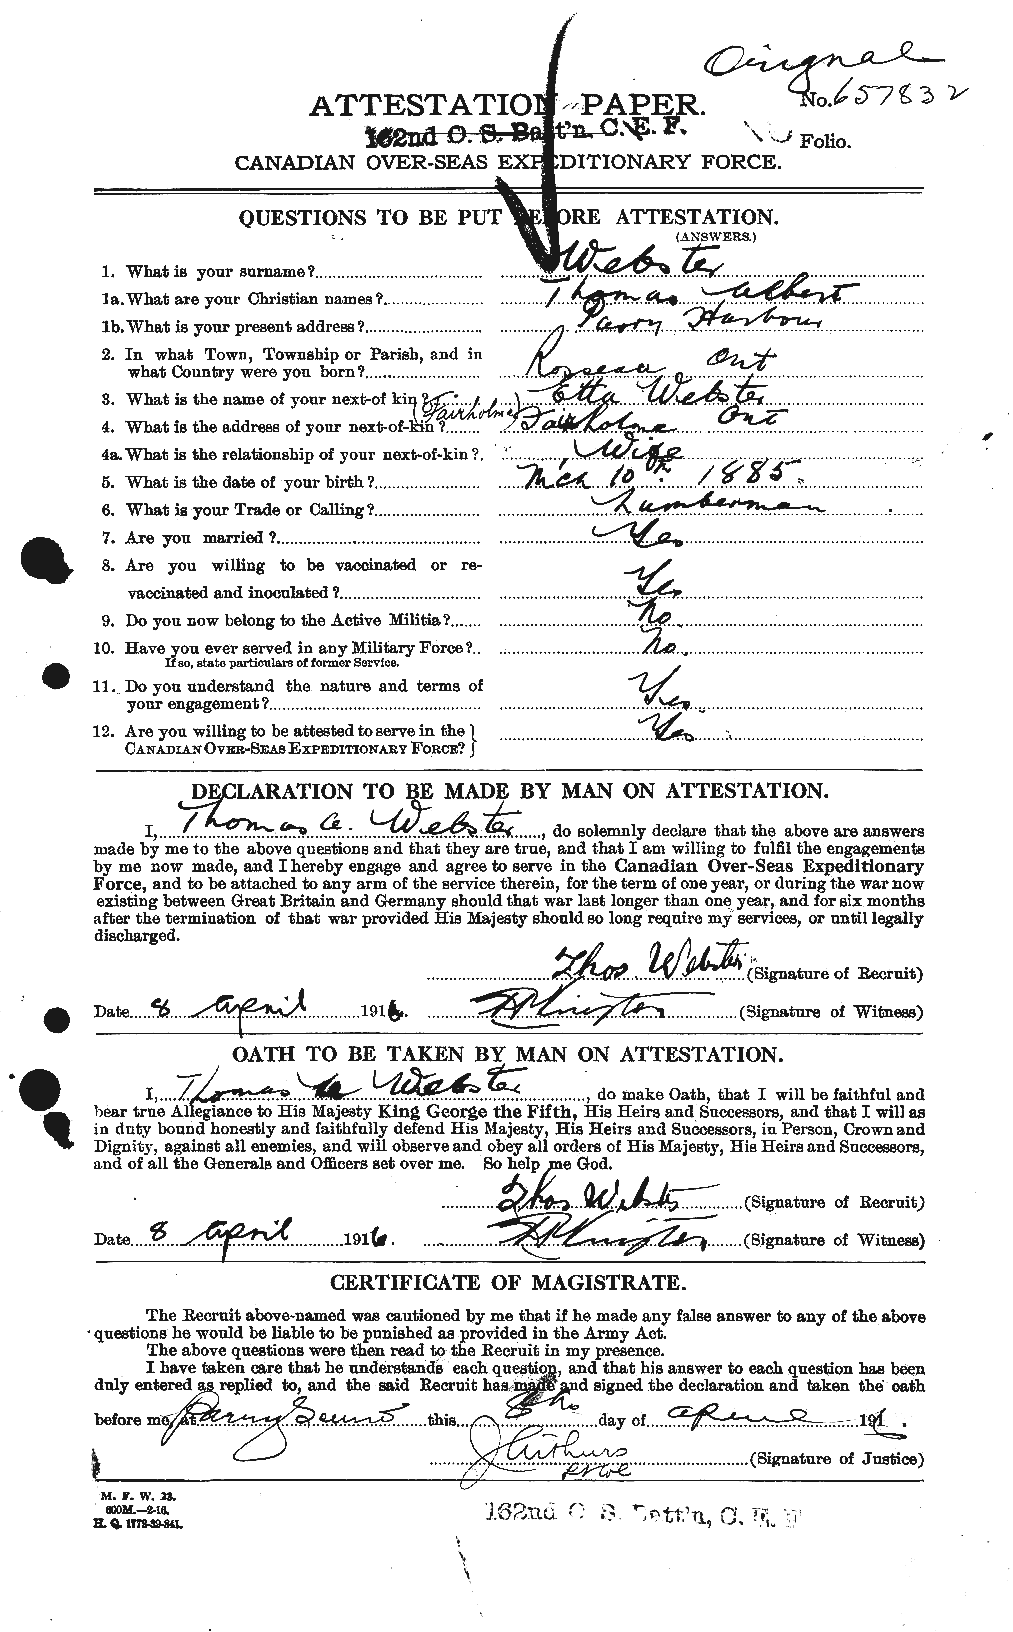 Personnel Records of the First World War - CEF 661989a